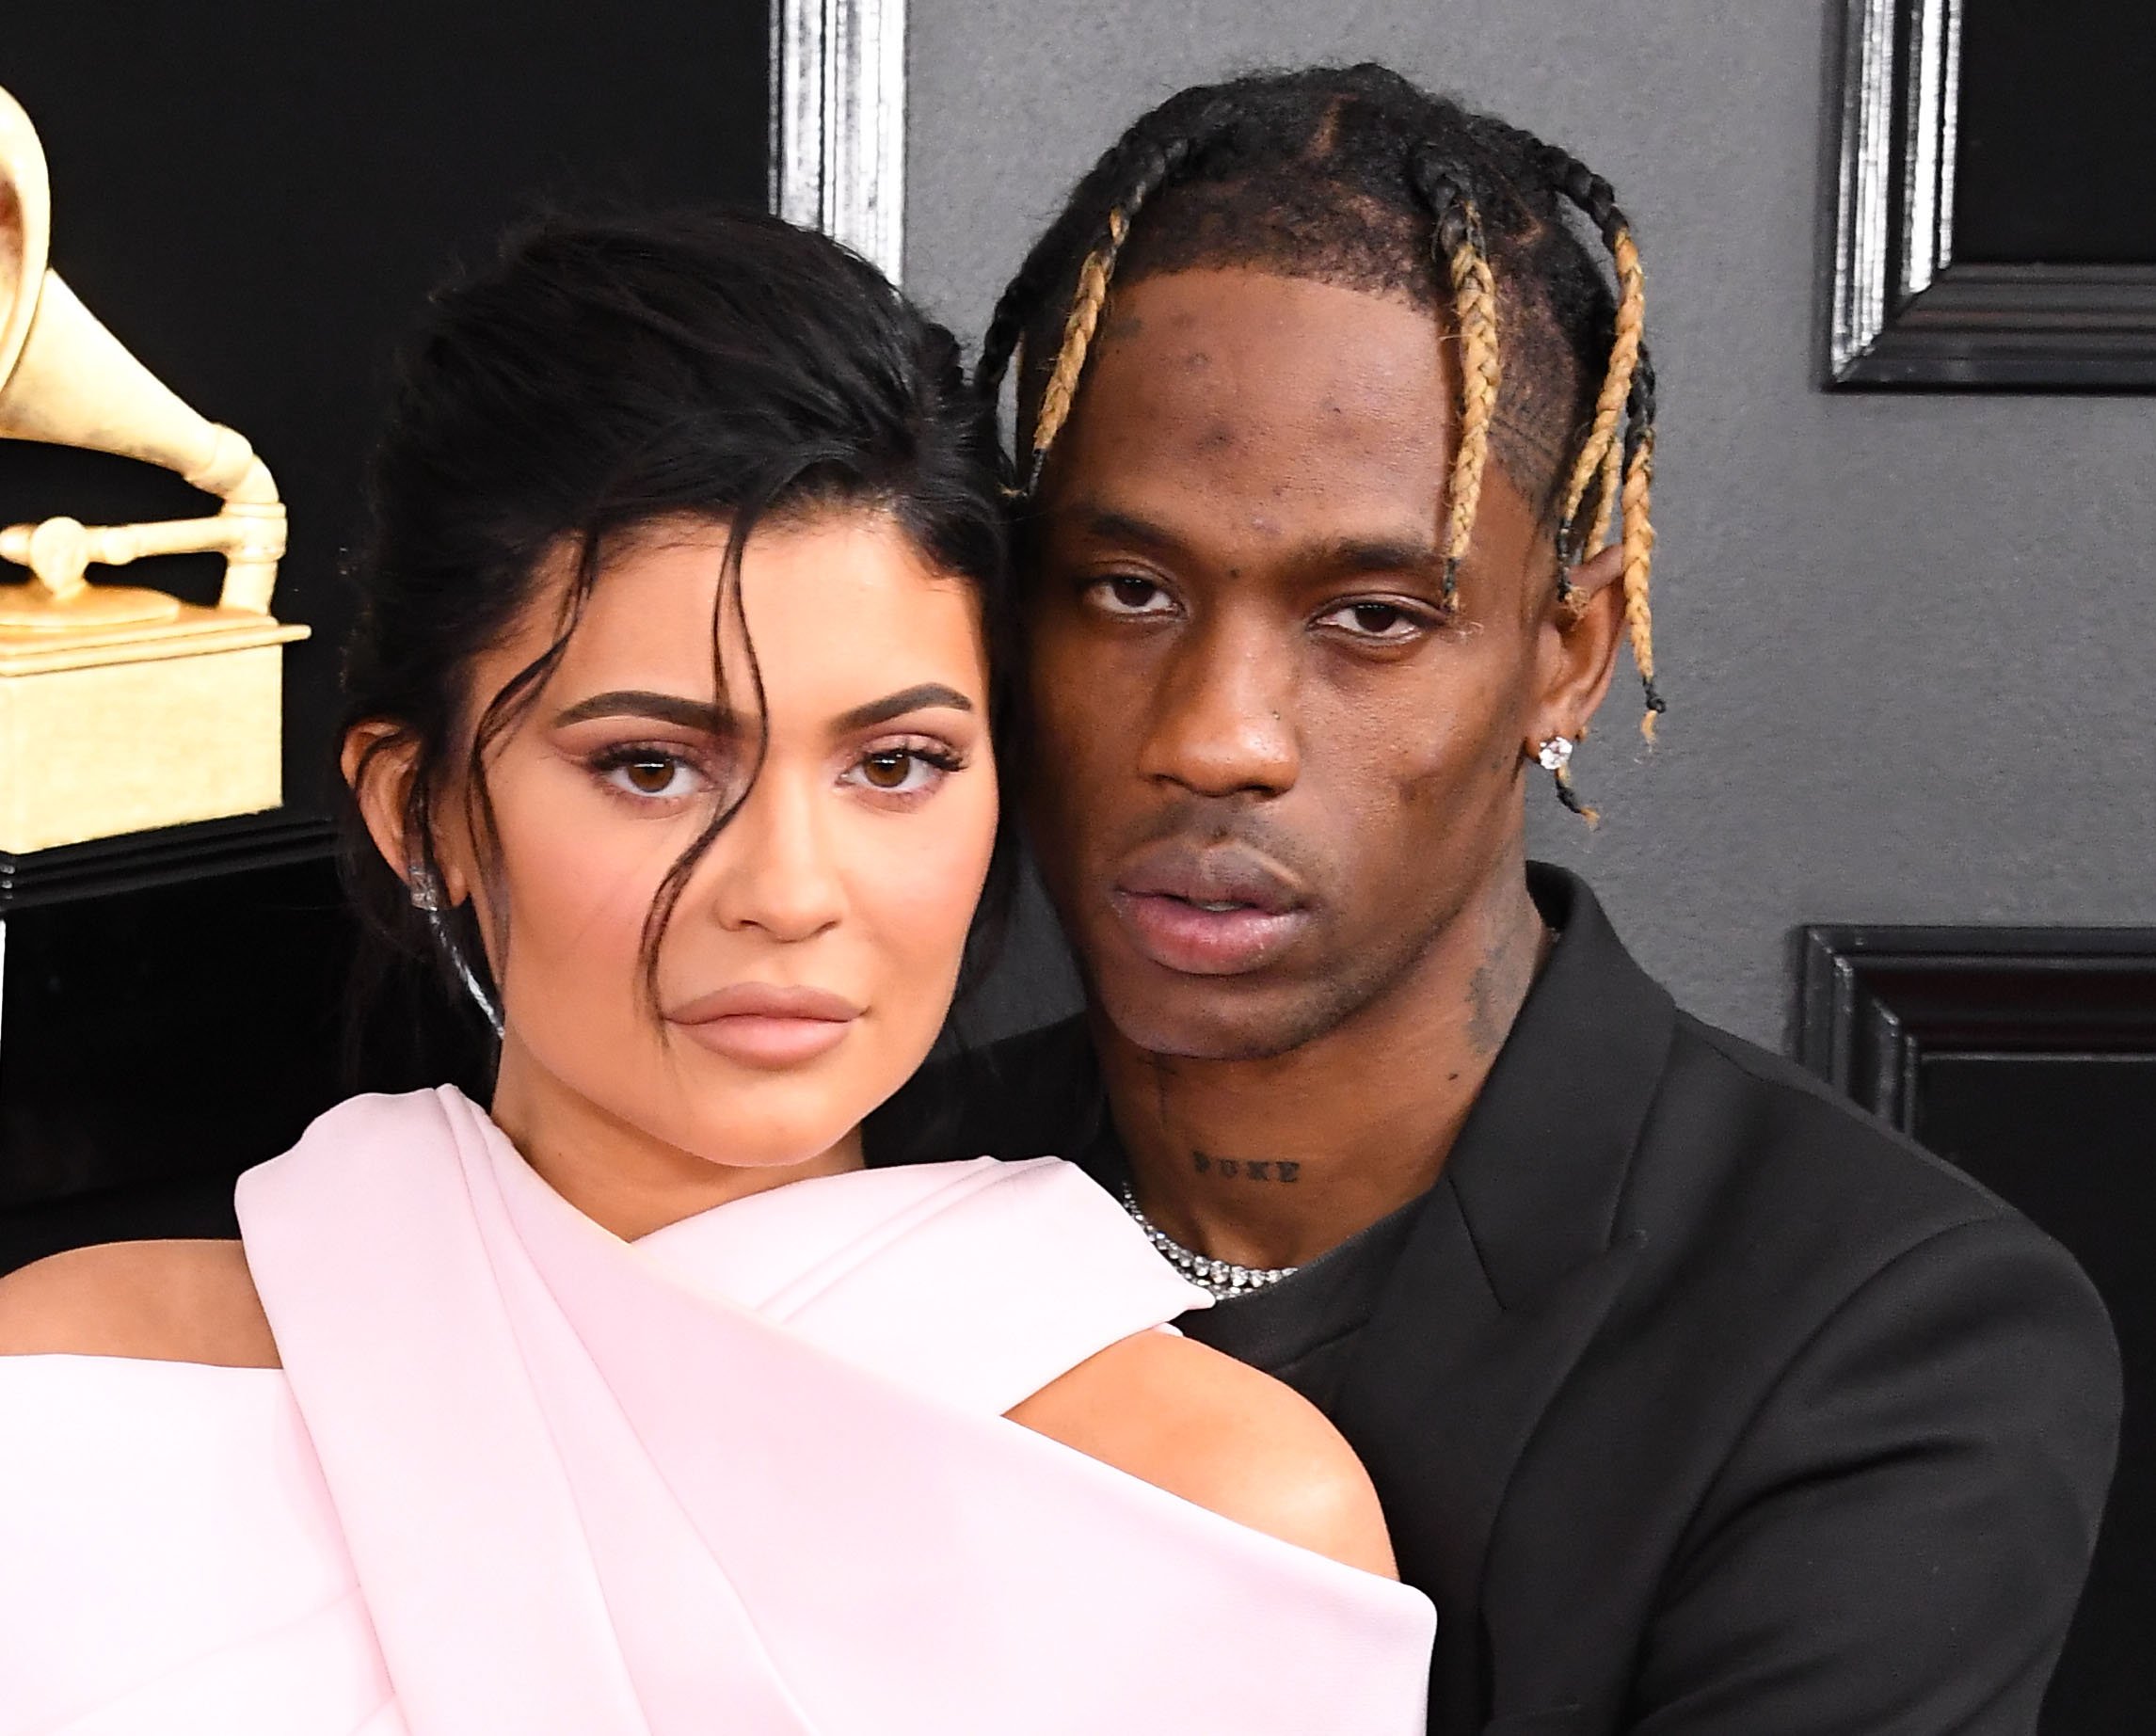 Kylie Jenner and Travis Scott looking intensely at the camera at the Grammy Awards.